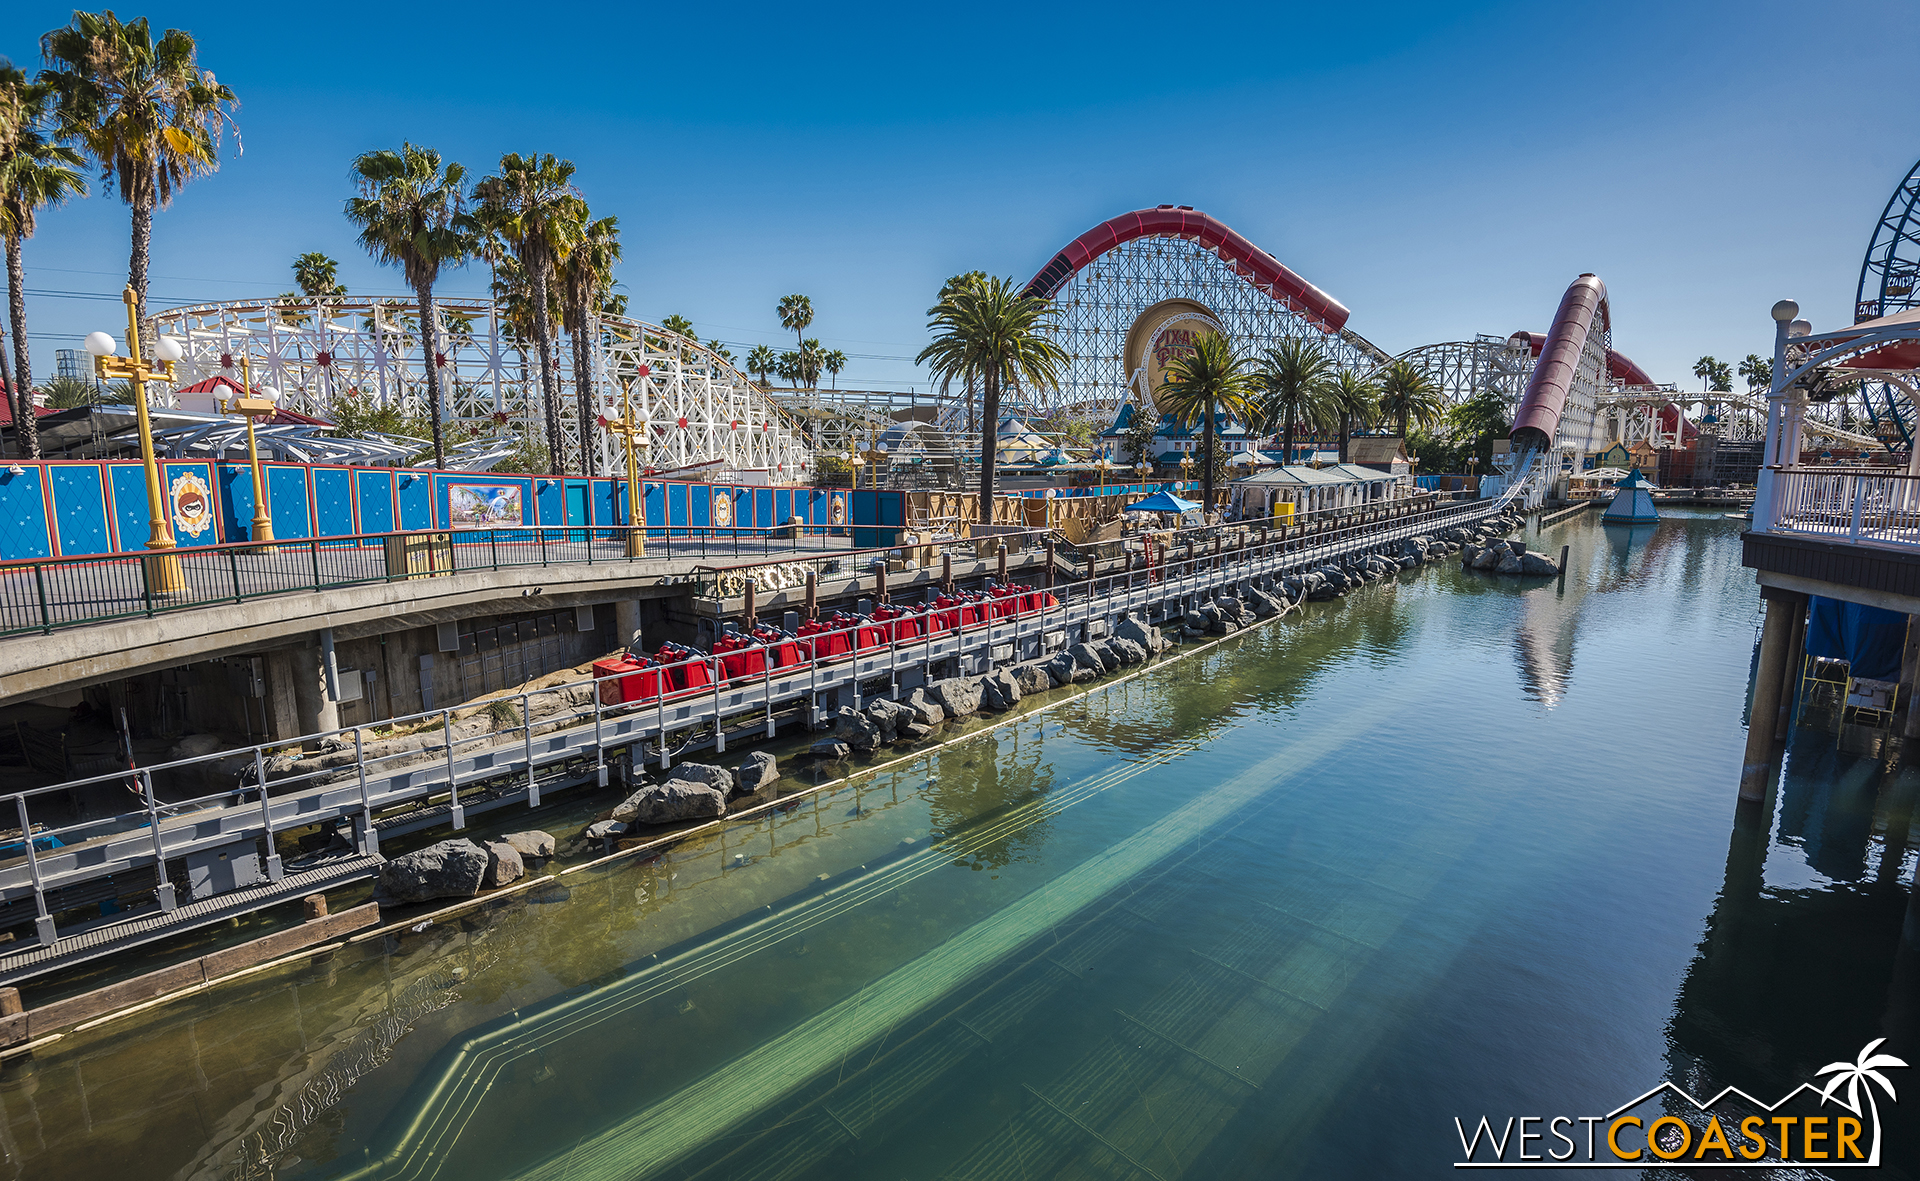  The Incredicoaster… allegedly going to be ready soon? 